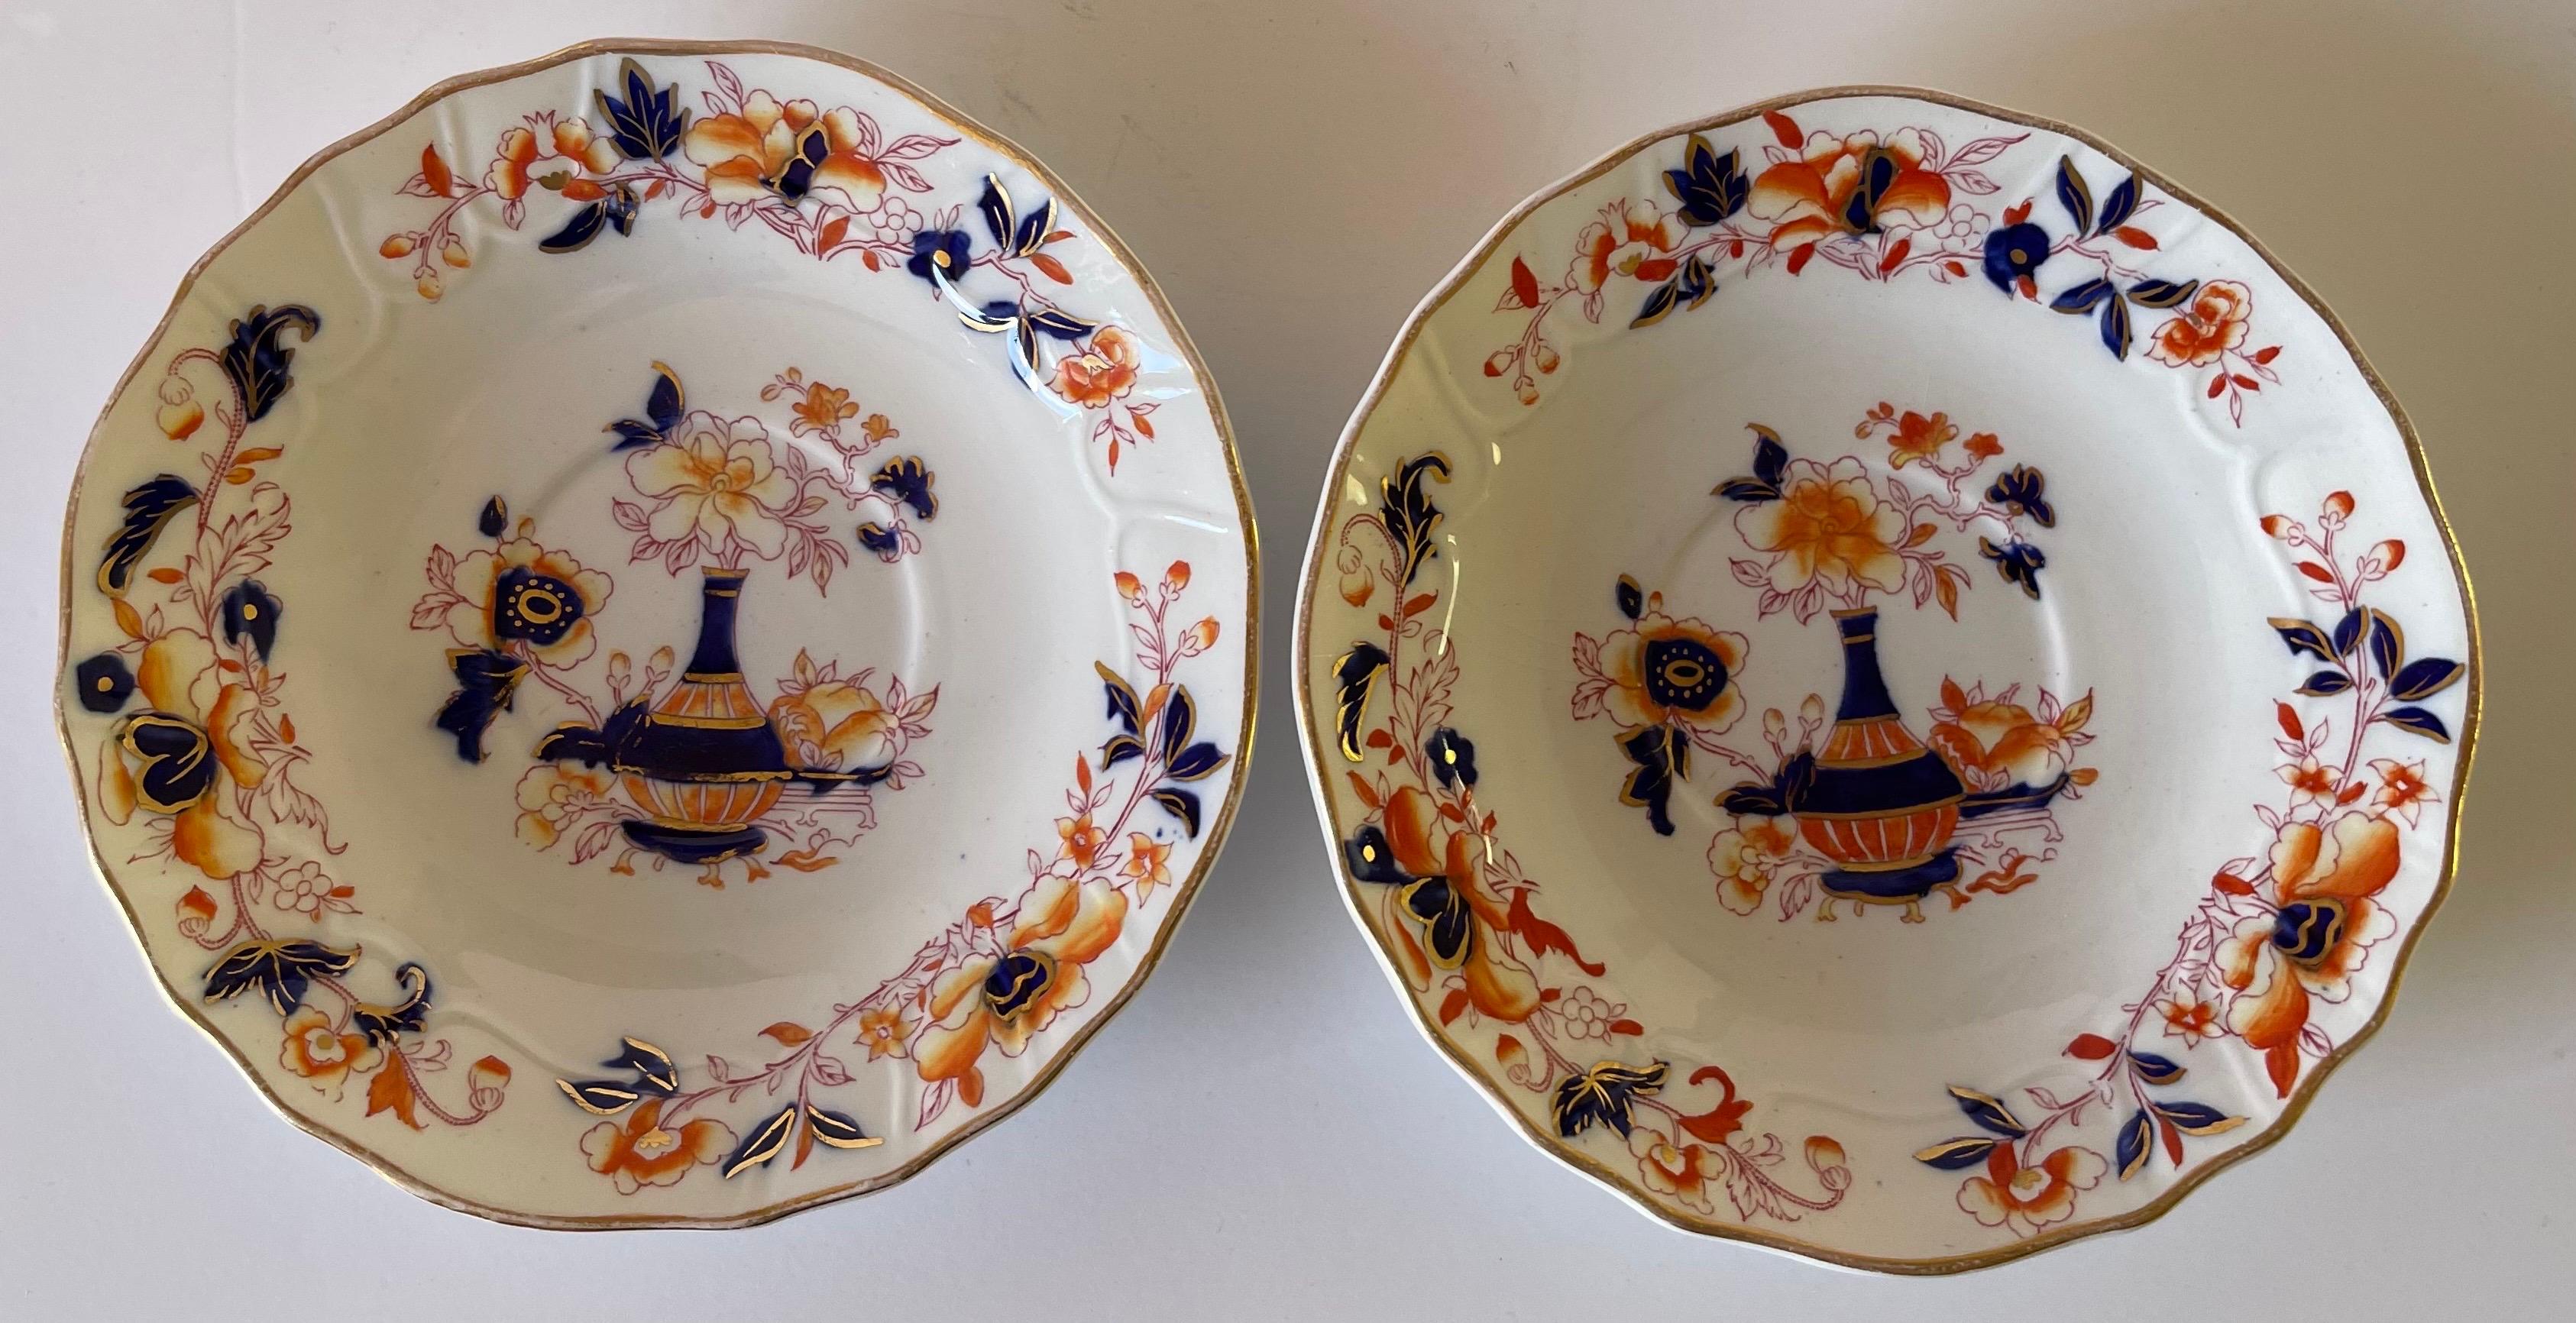 Pair of 1920s English chinoiserie Chinese vase motif saucers. Original condition with no visible signs of previous repairs.
Illegible brand stamp on the underside. 